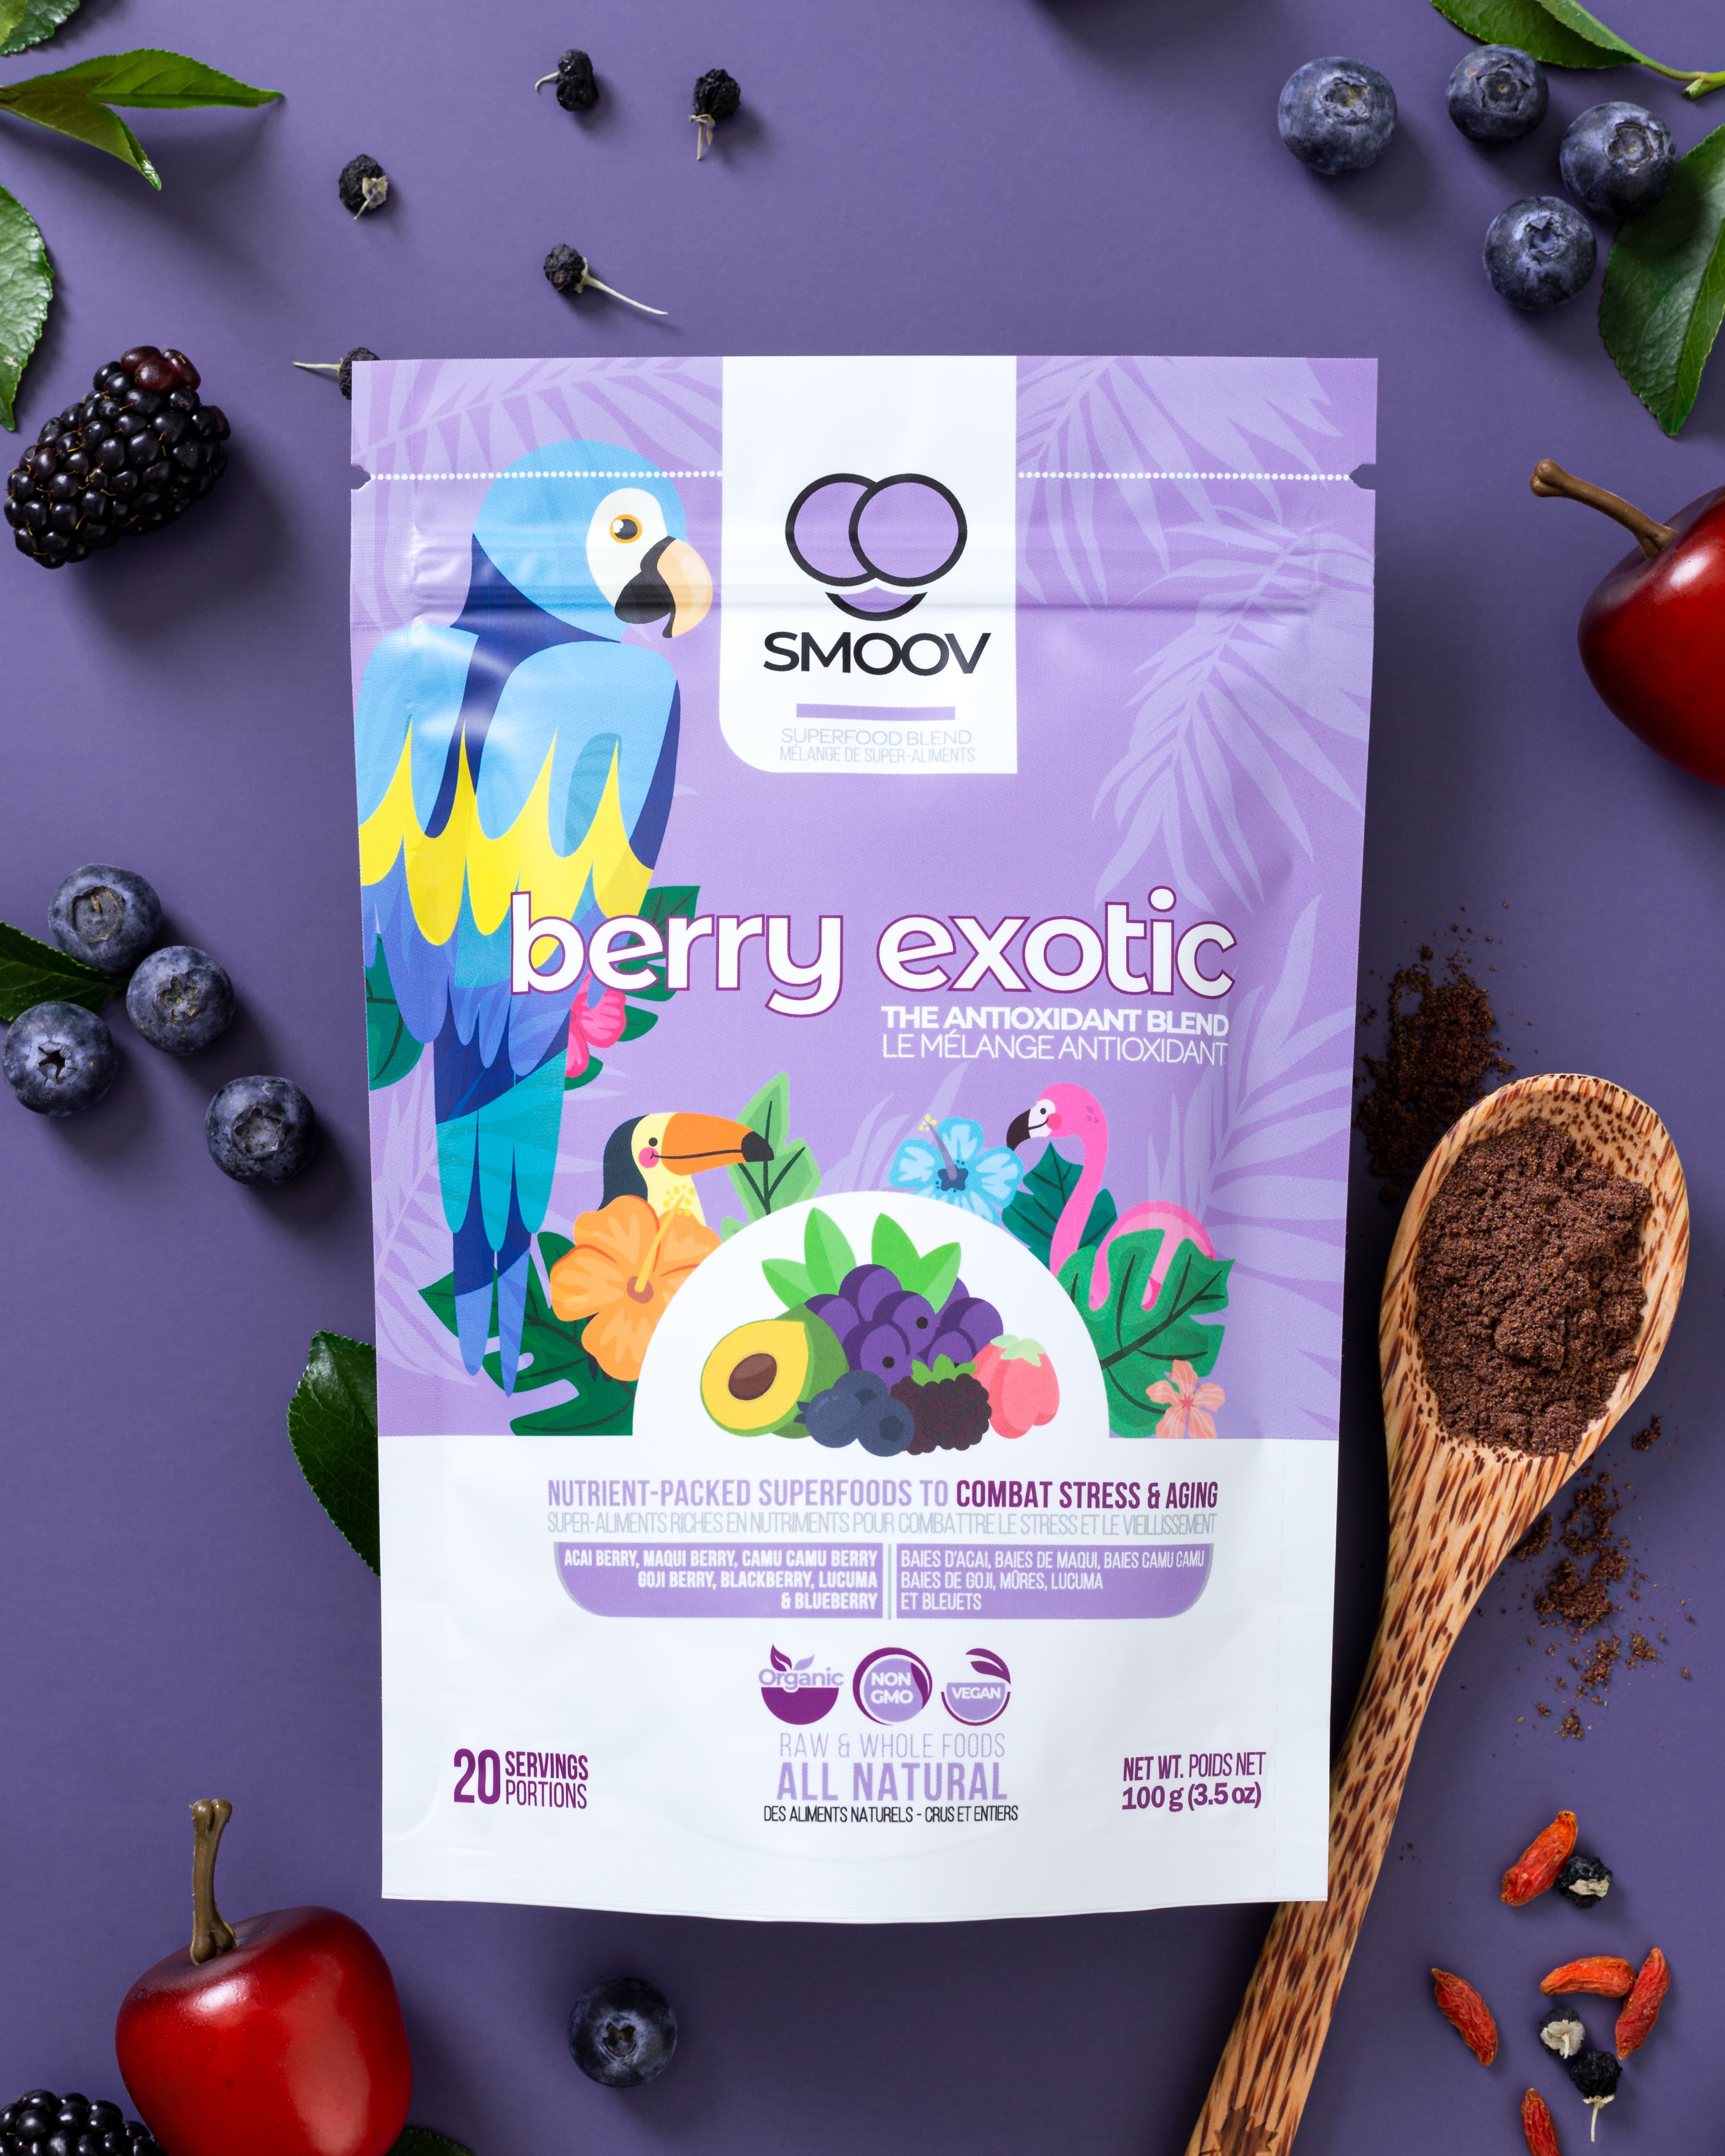 Our berry exotic blend has 8 antioxidant-rich superfoods, 7 of which are some of the world's most nutritious berries. 